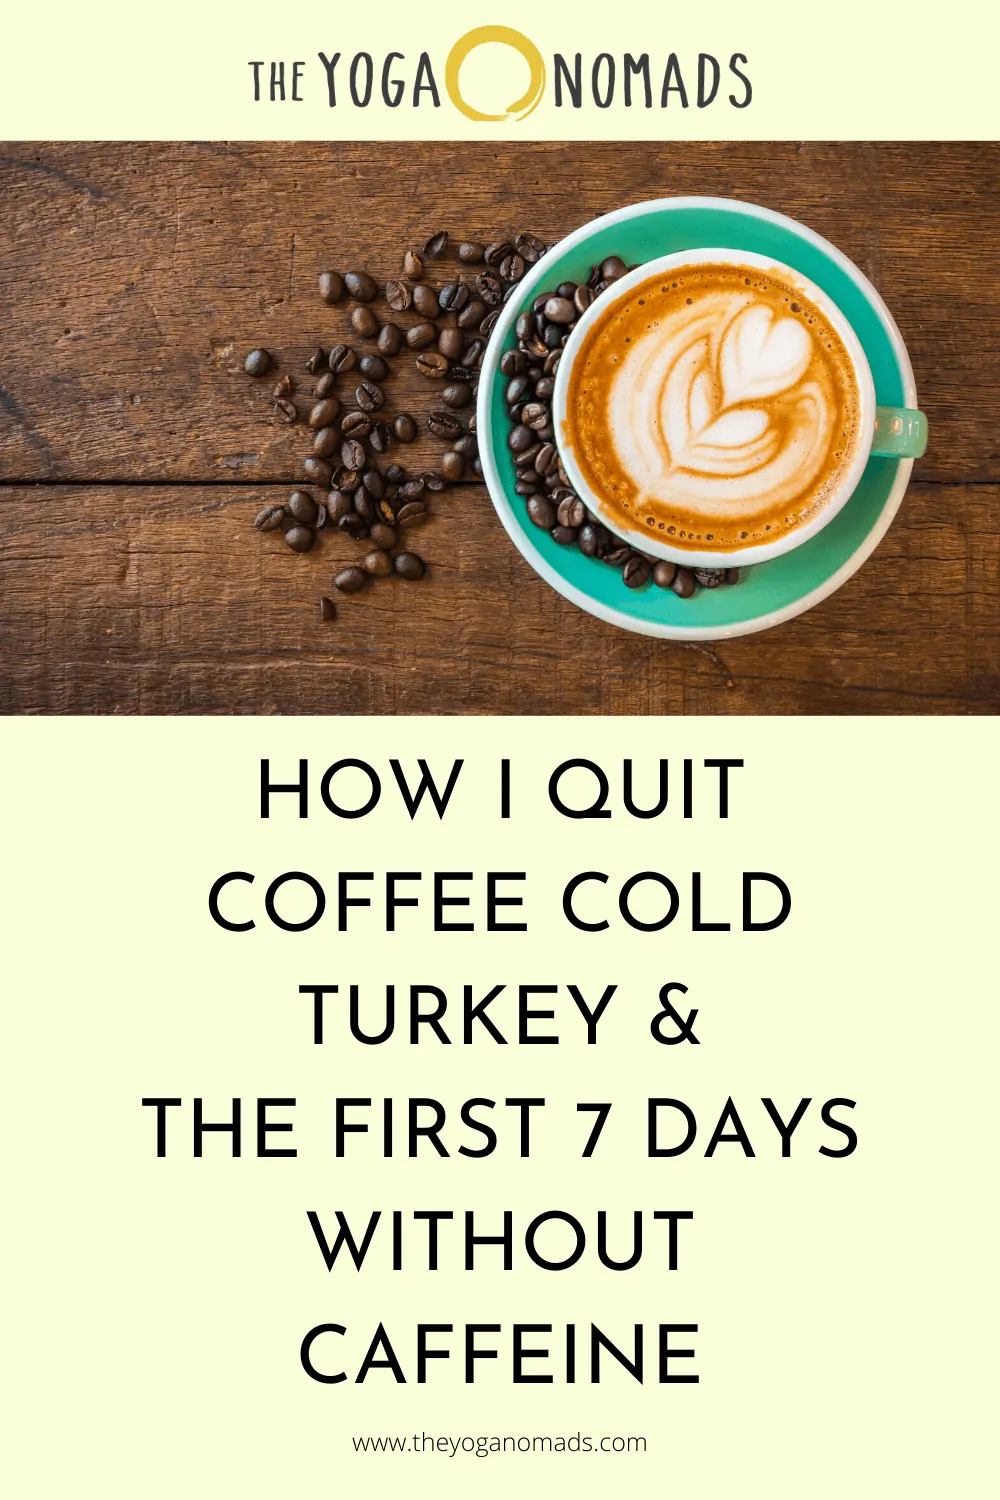 How I Quit Coffee Cold Turkey and The First 7 Days Without Caffeine